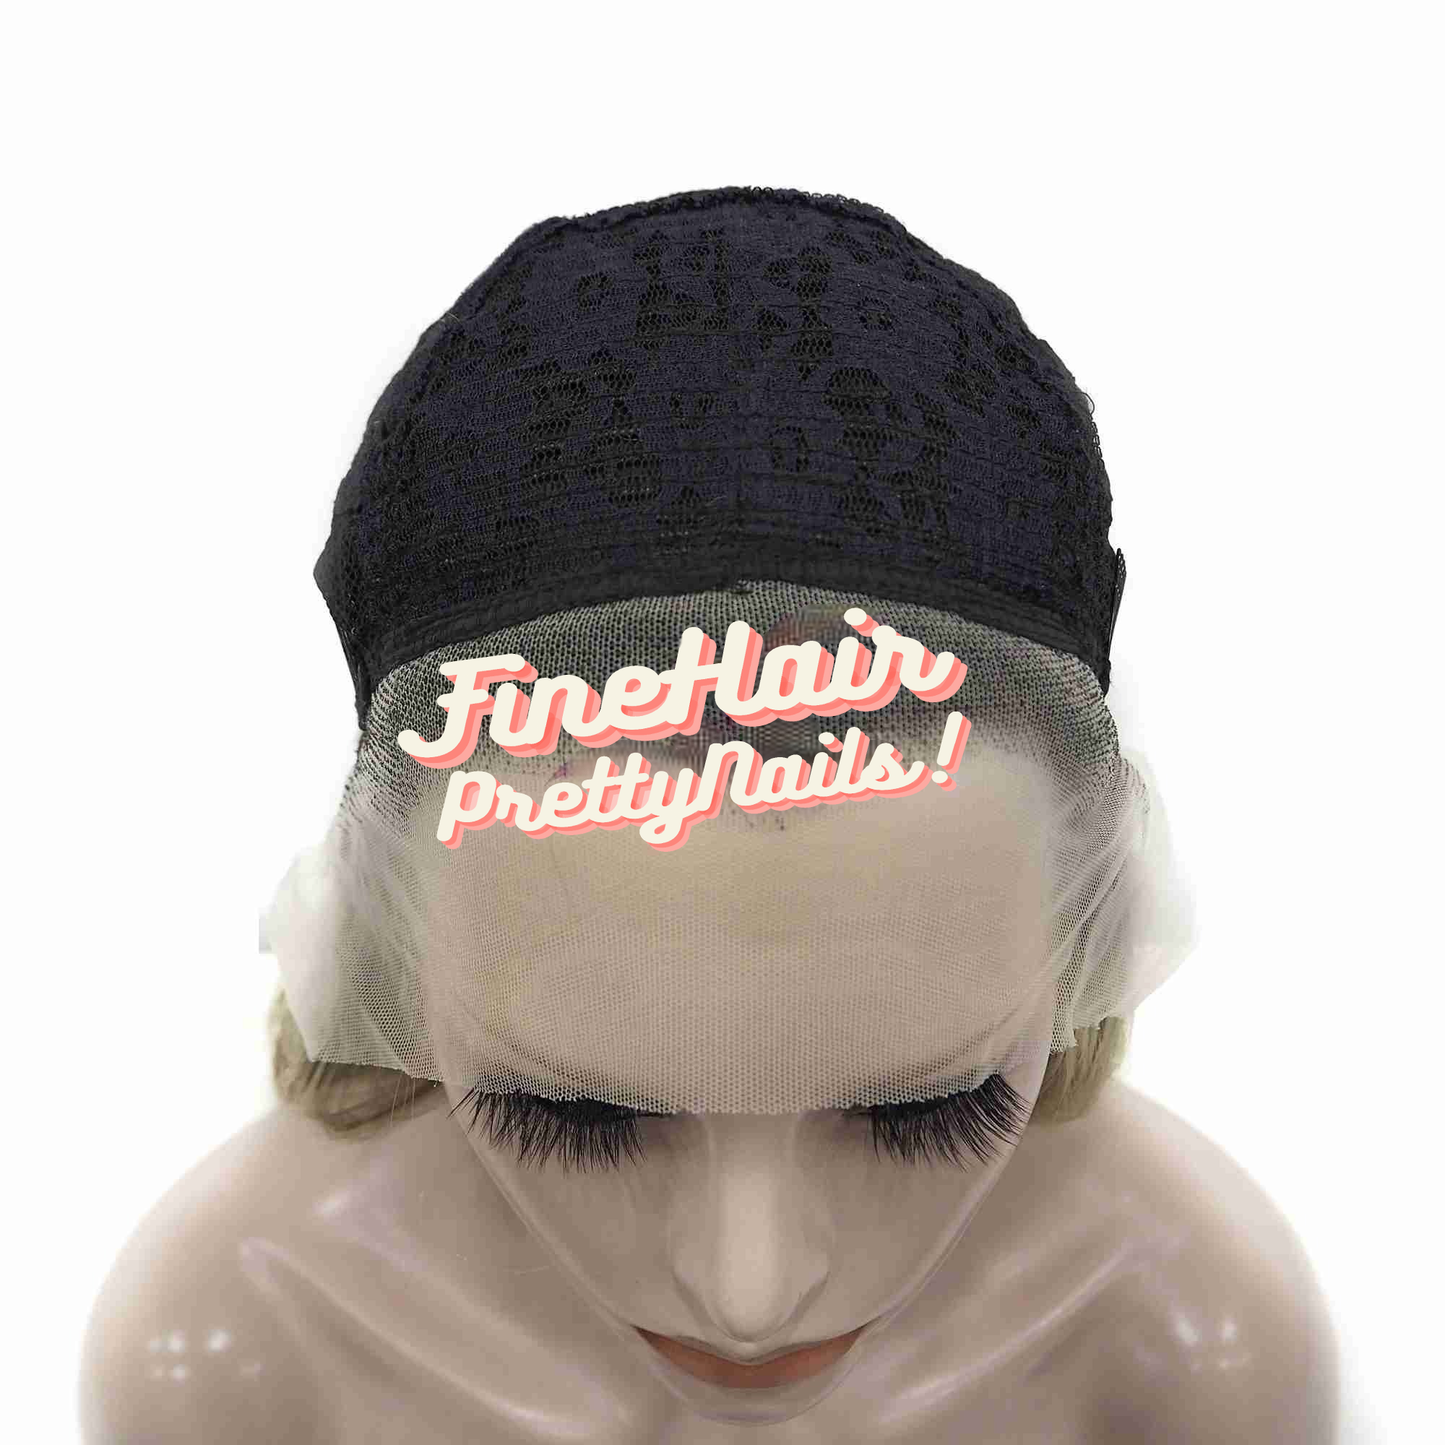 inside lace view of brown to blonde ombre wavy wig with platinum blond highlights on mannequin head